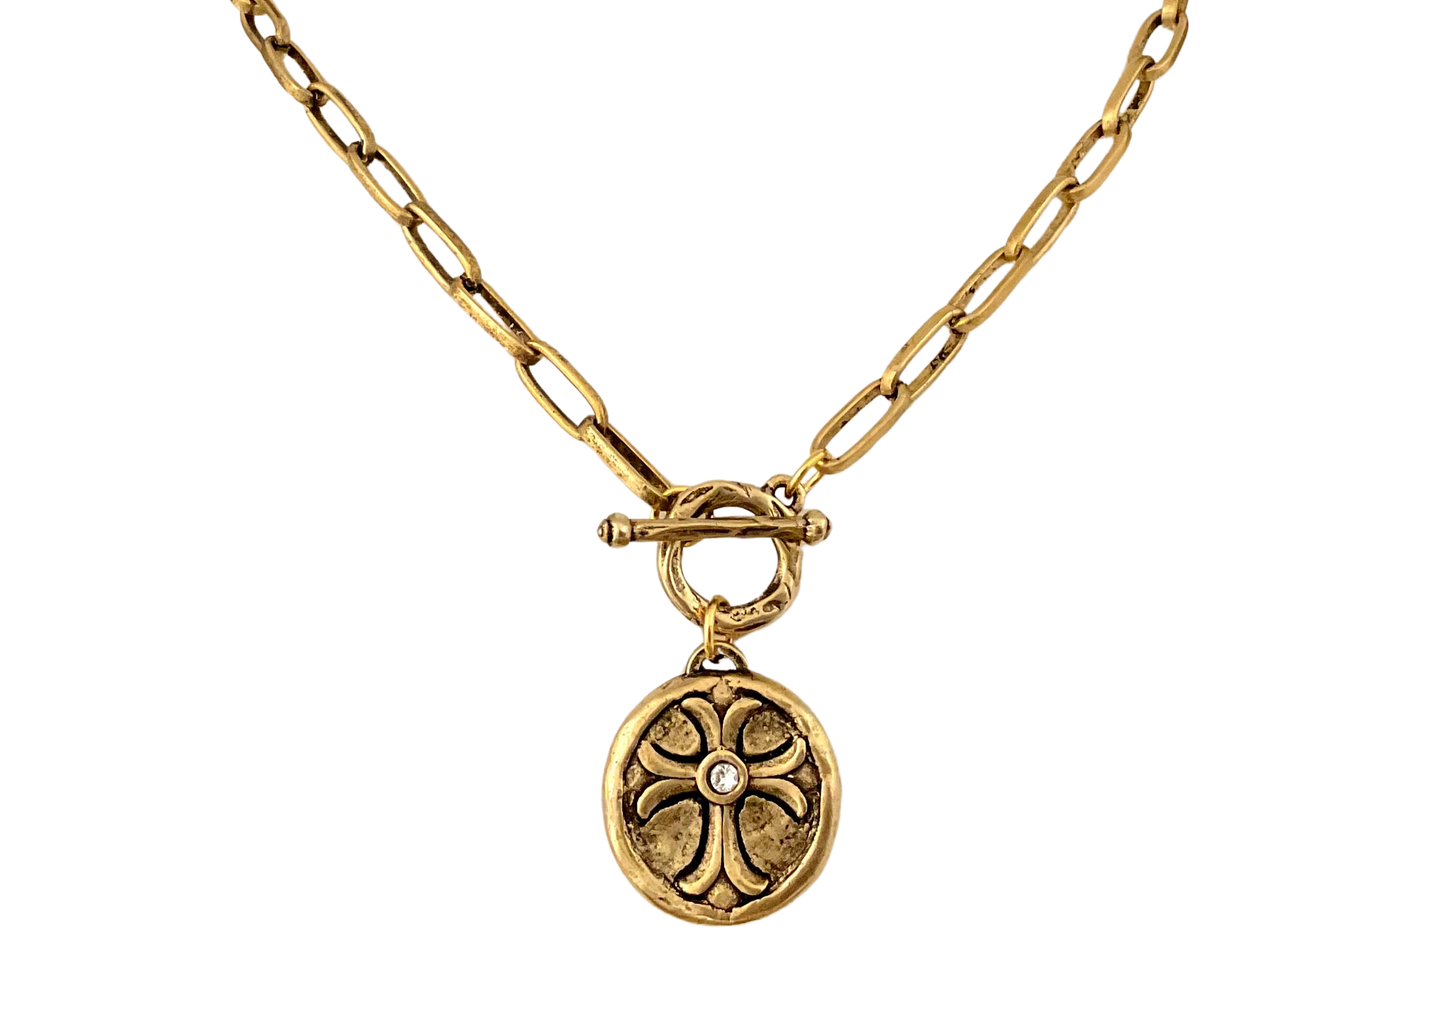 Vintage Gold Plated Chain with Vintage Cross Pendant